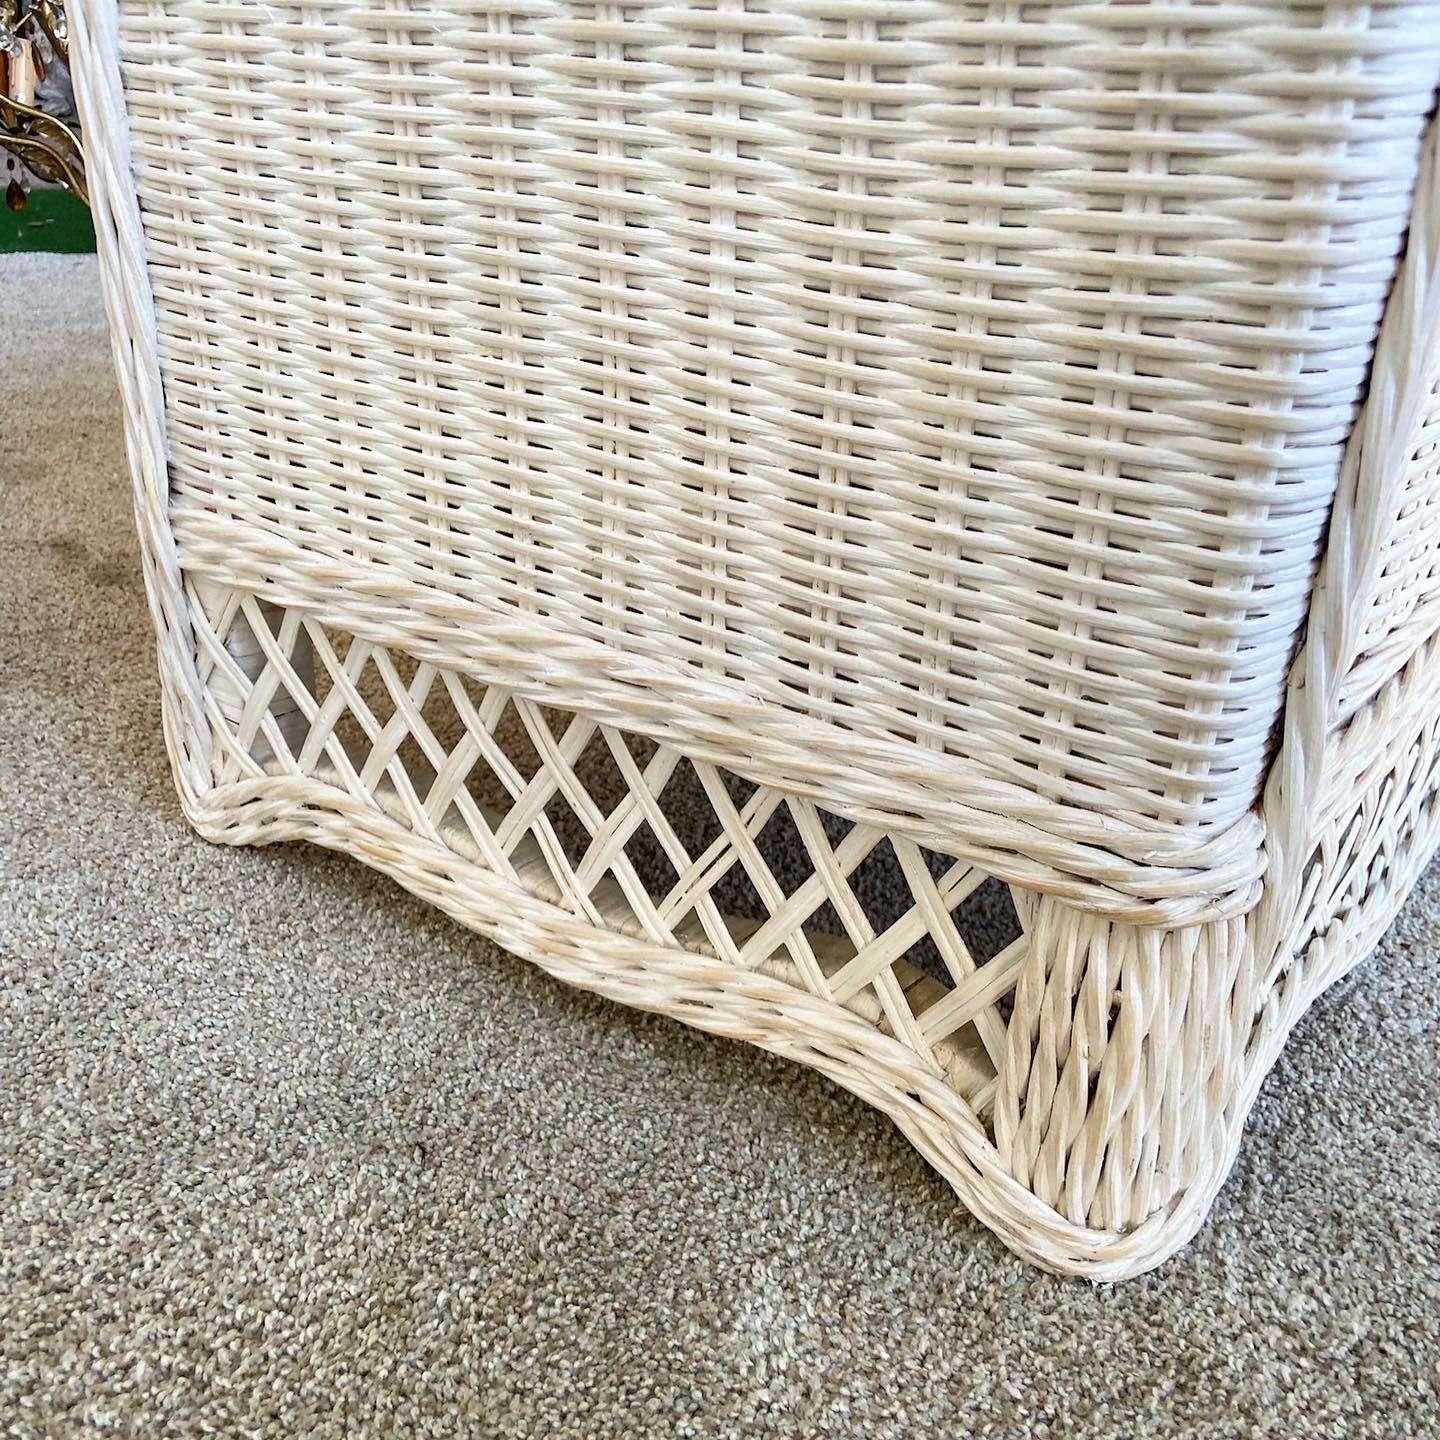 1990s Boho Chic White Wicker Glass Top Nightstands - Set of 2 For Sale 1